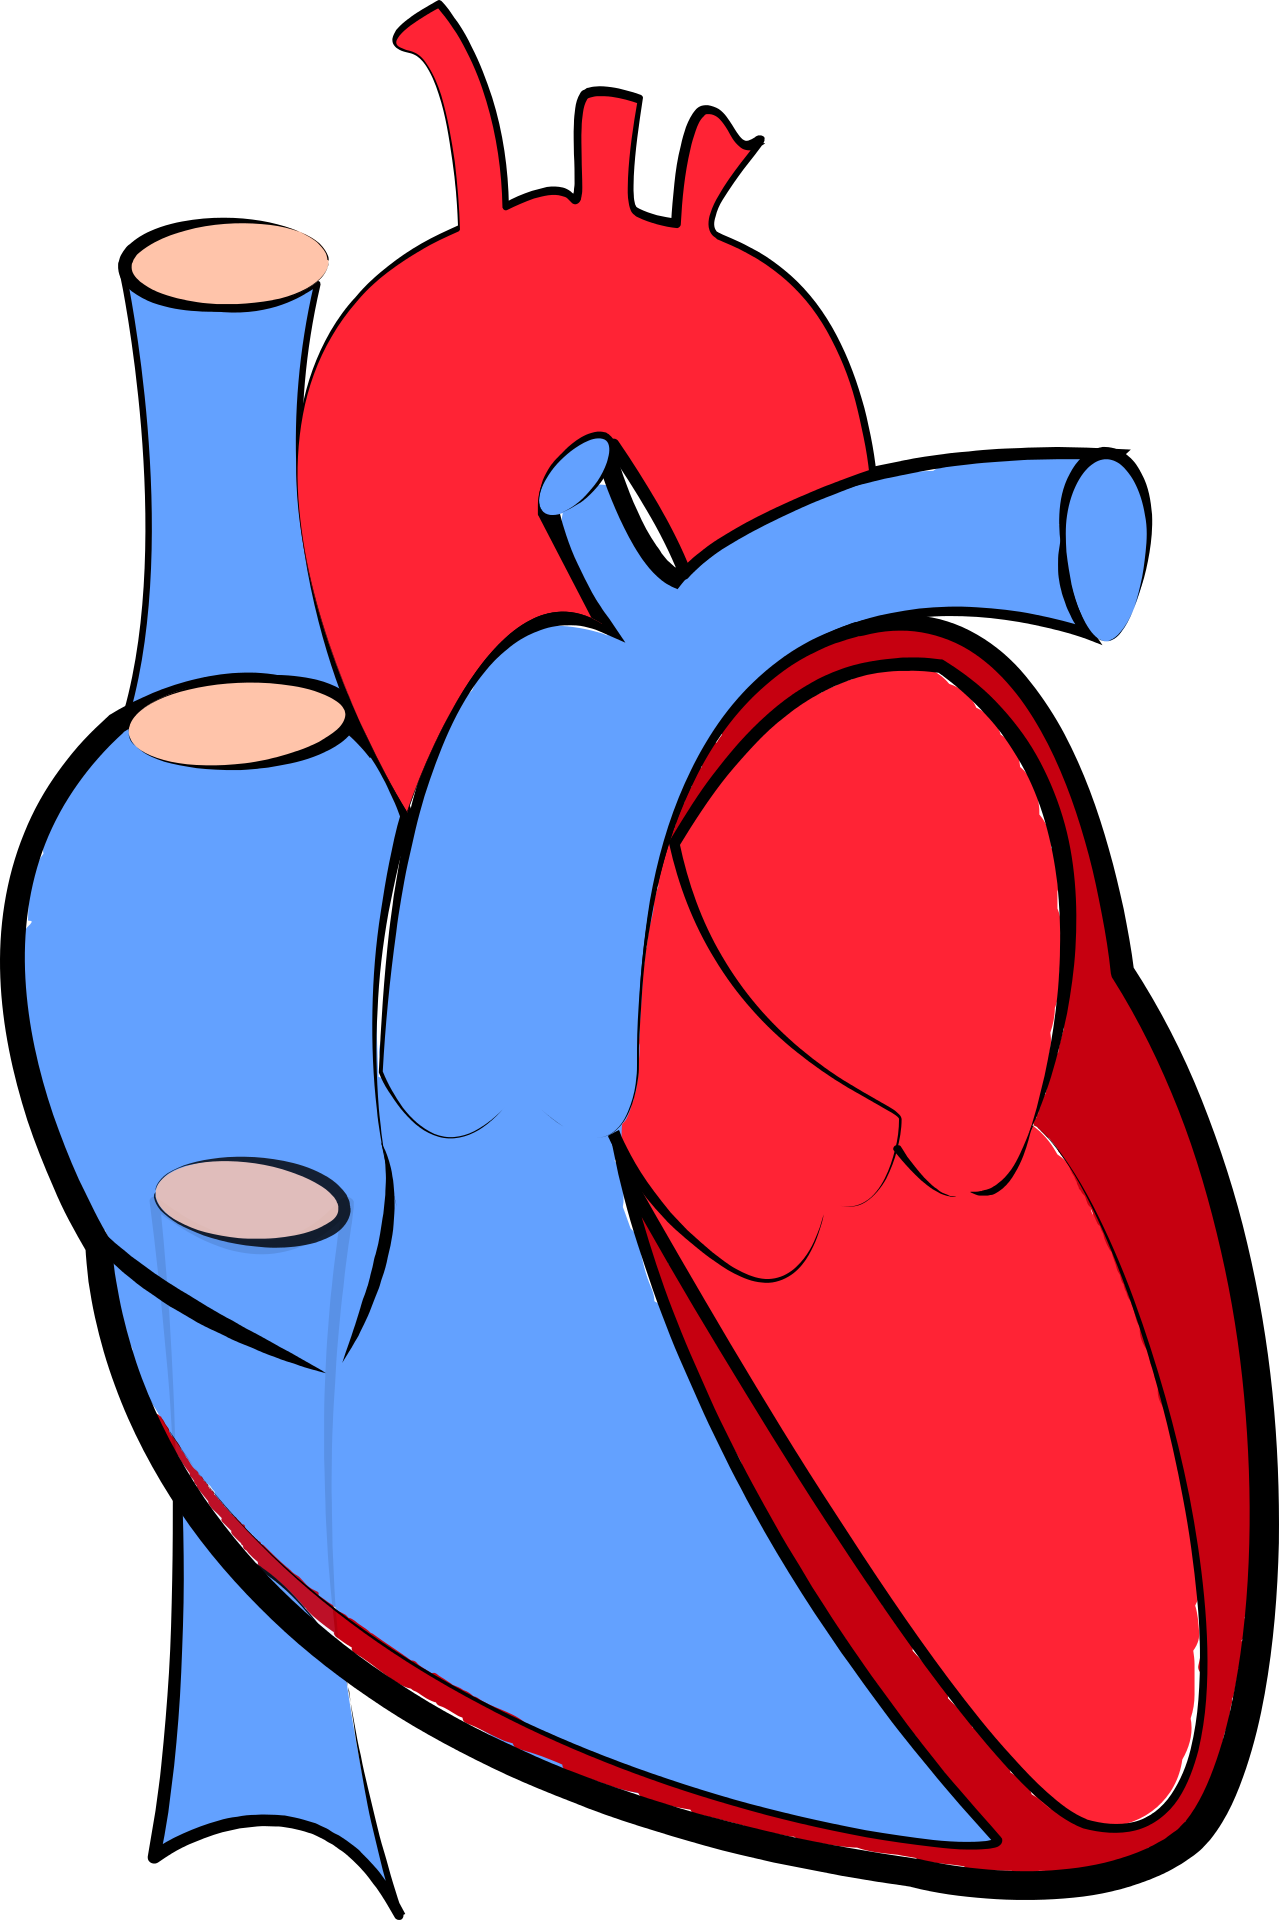 Heart - Human Heart Blue And Red (1279x1920)